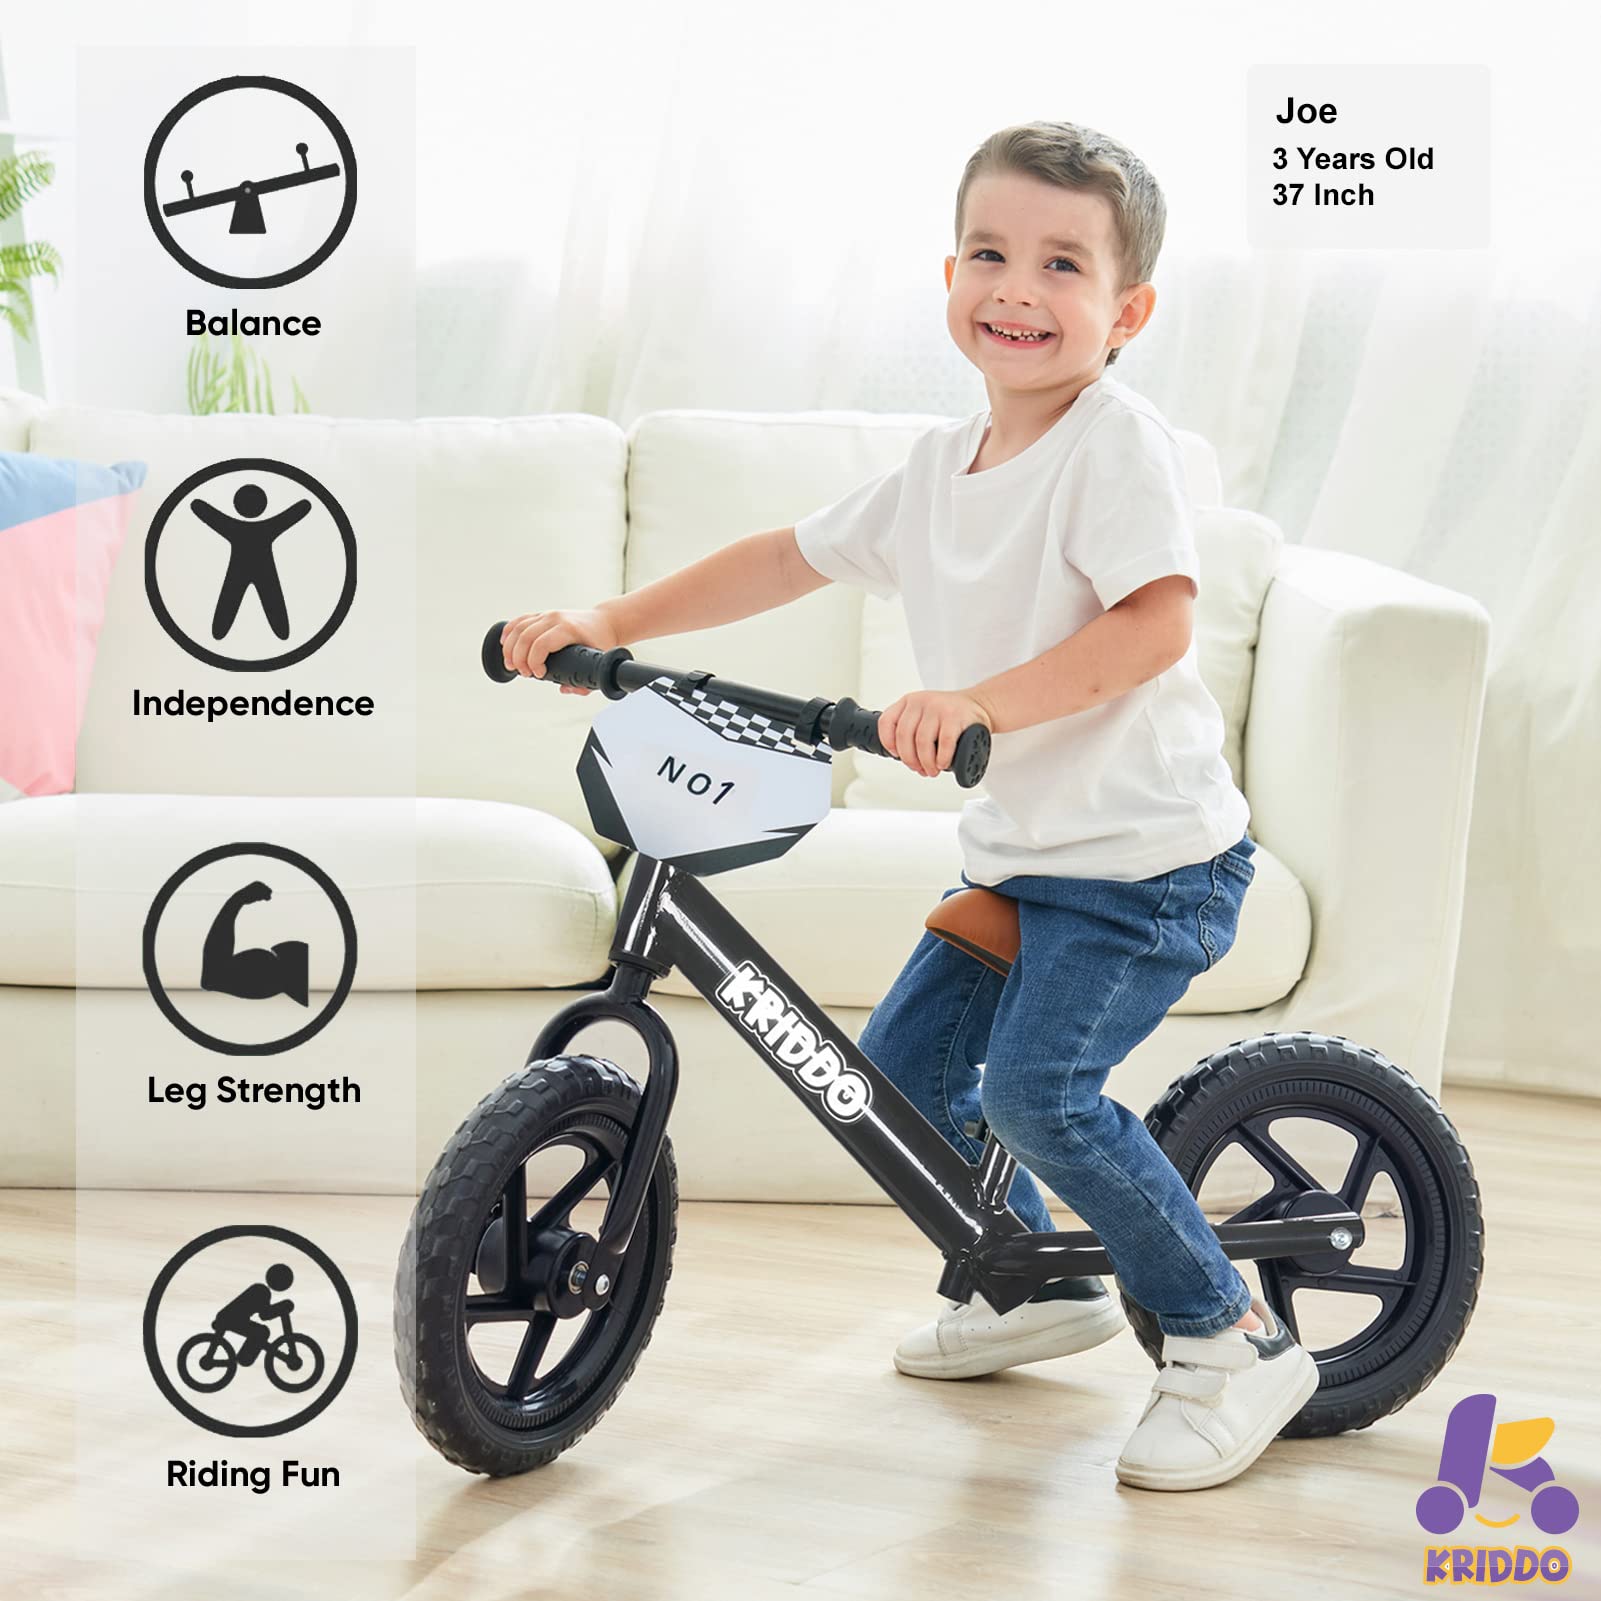 KRIDDO Toddler Balance Bike 2 Year Old, Age 18 Months to 5 Years Old, 12 Inch Push Bicycle with Customize Plate (3 Sets of Stickers Included), Steady Balancing, Gift Bike for 2-3 Boys Girls, Black